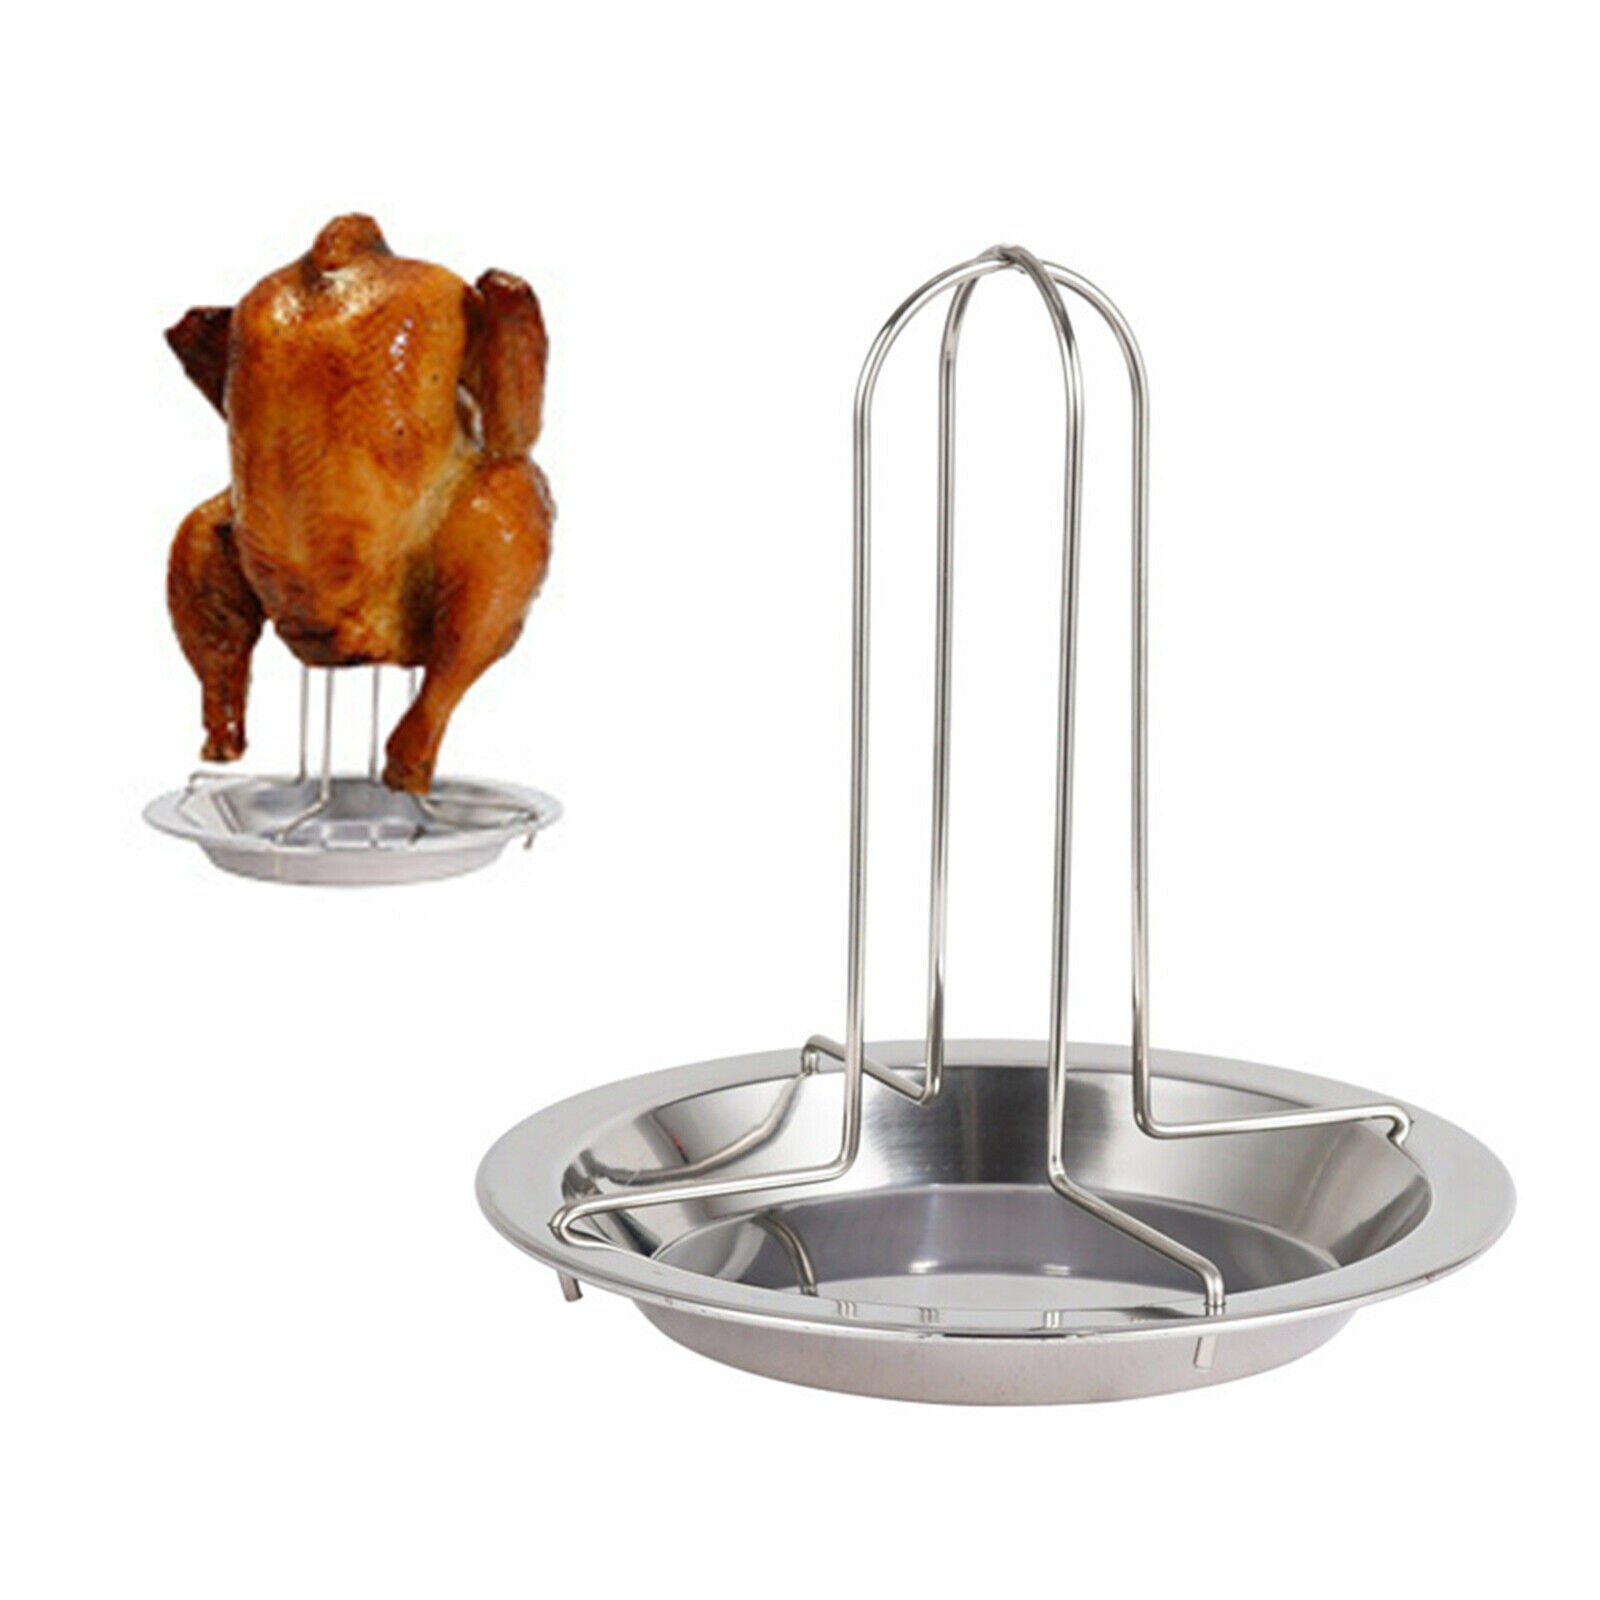 Vertical Rooster Chicken Roaster Rack Stands Rack Barbecue Grill Space Saver